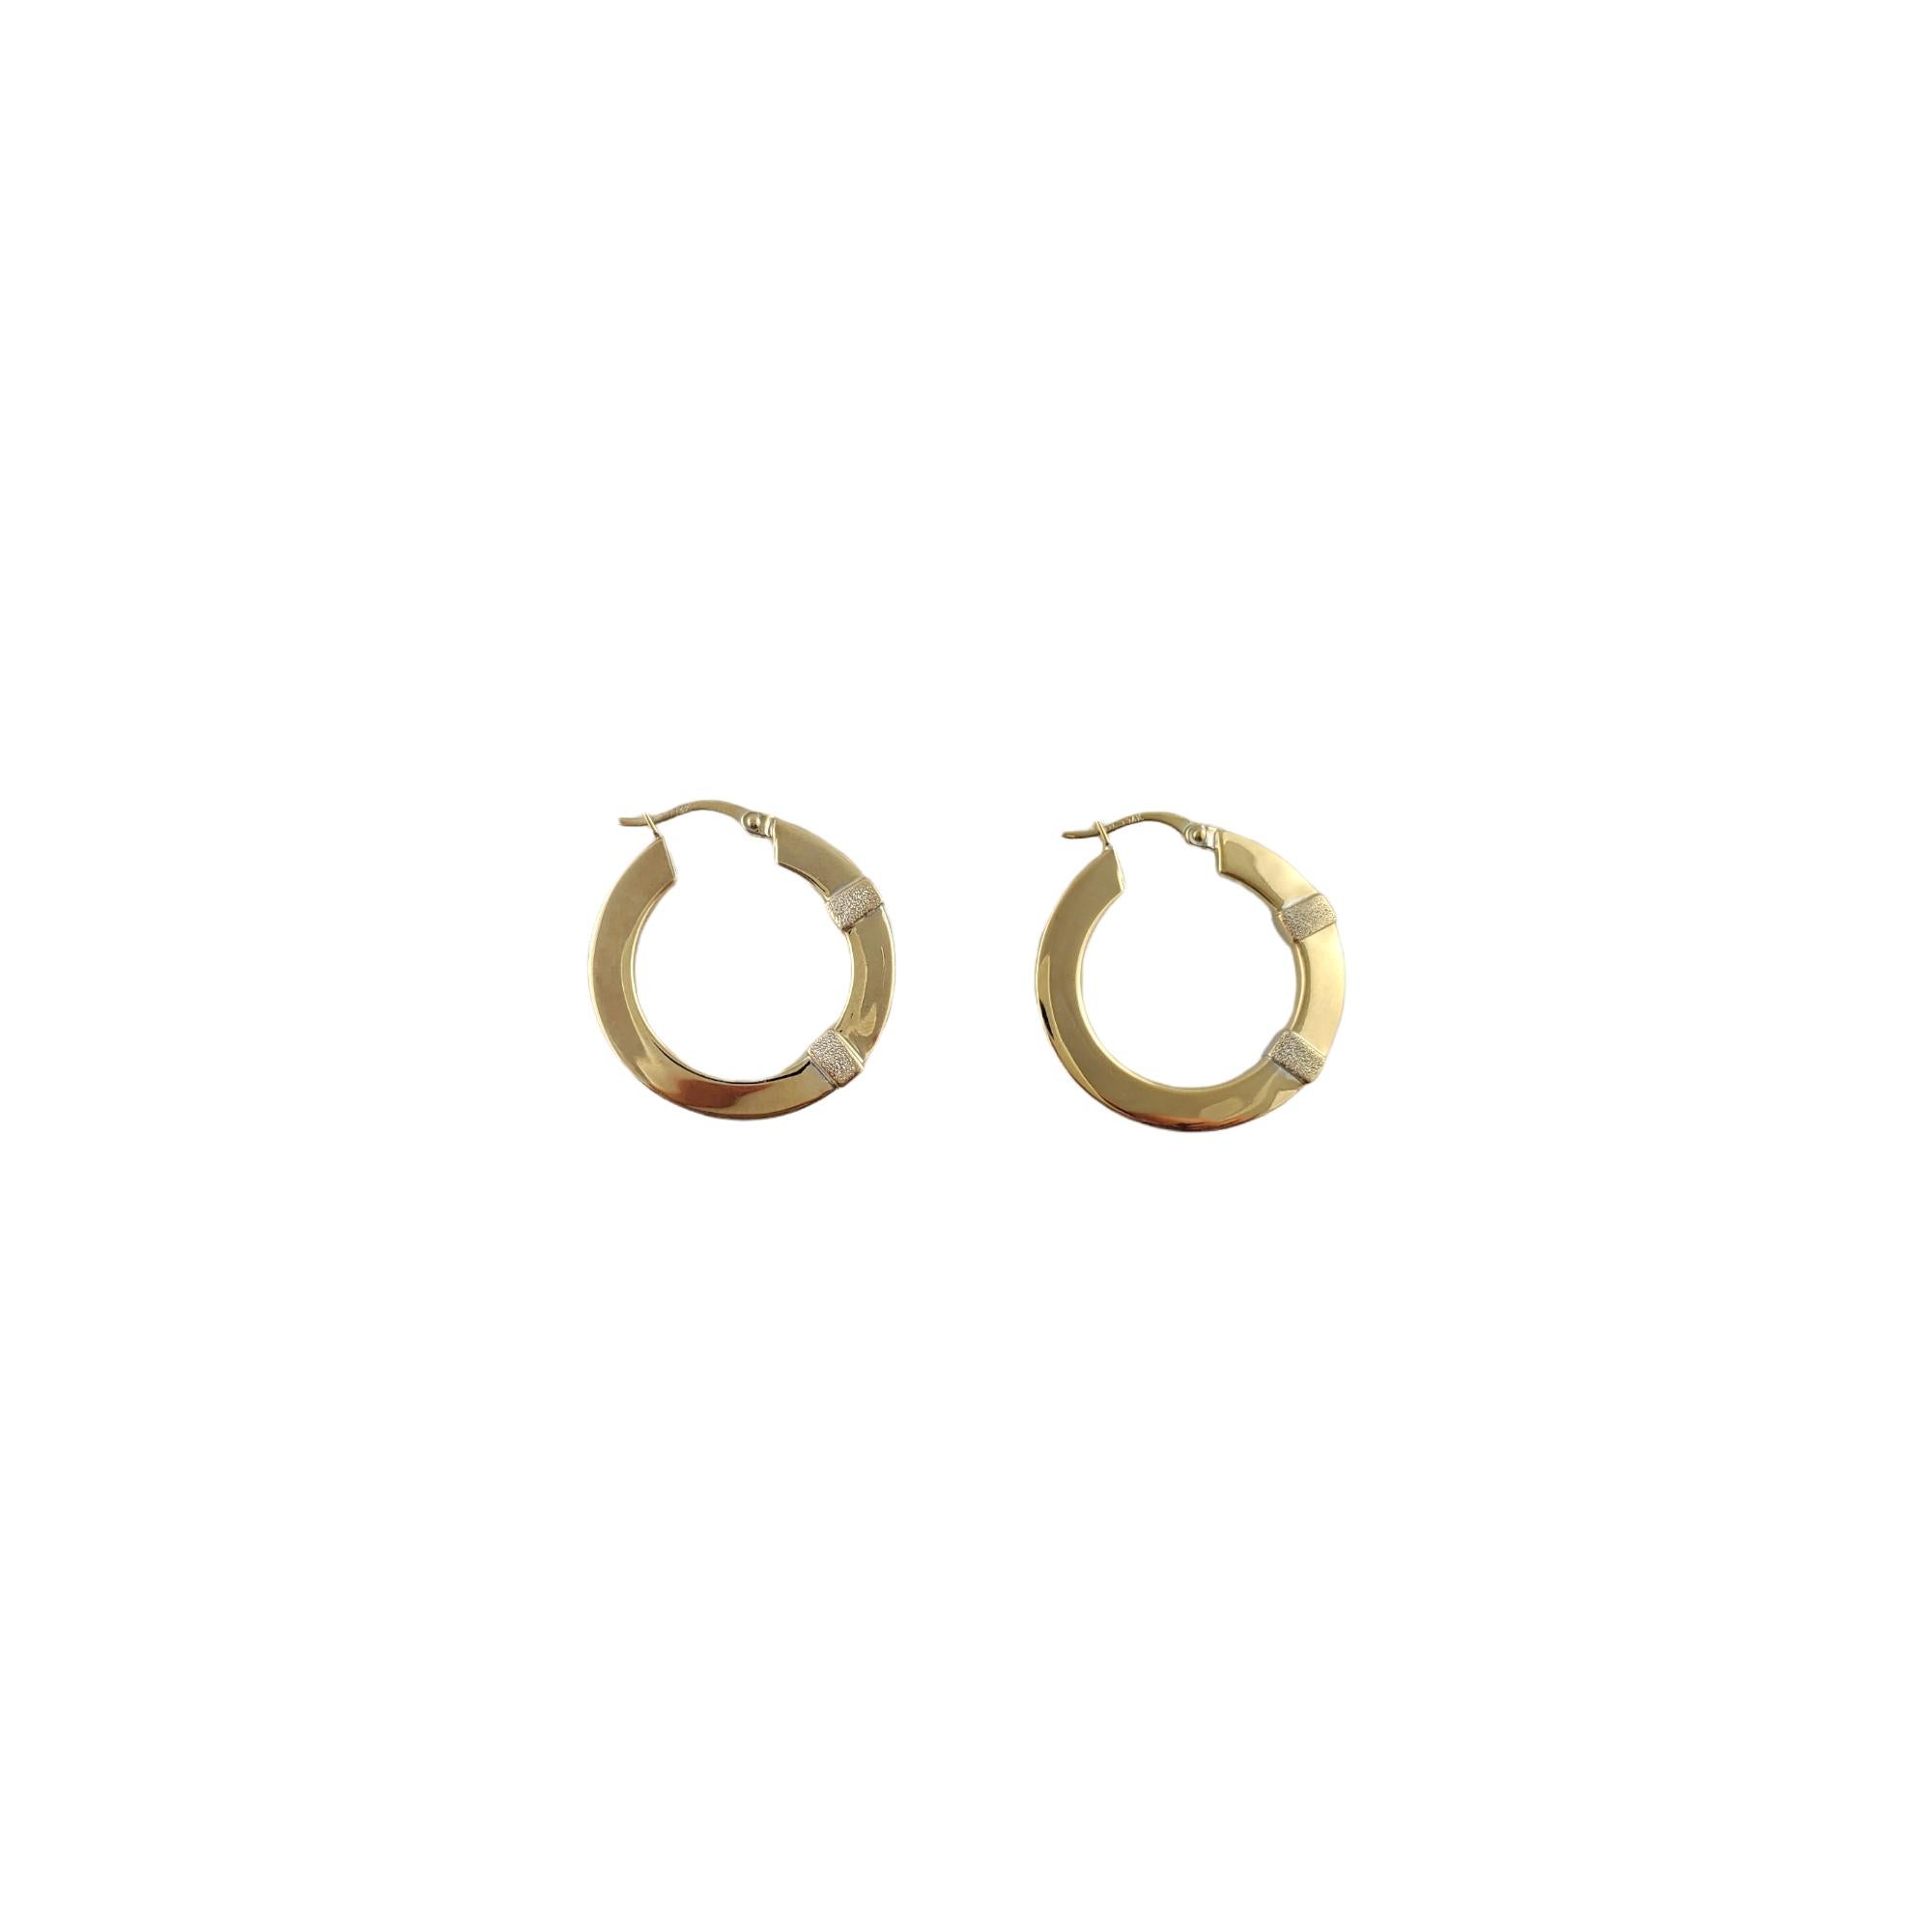 14K Yellow and White Gold Hoop Earrings

Crafted in 14K these beautiful hoops are mostly yellow gold tone but have hints of white gold with a grainy texture giving these earrings a sparkle feel to them and are a very unique style.

Size: 28.5mm X